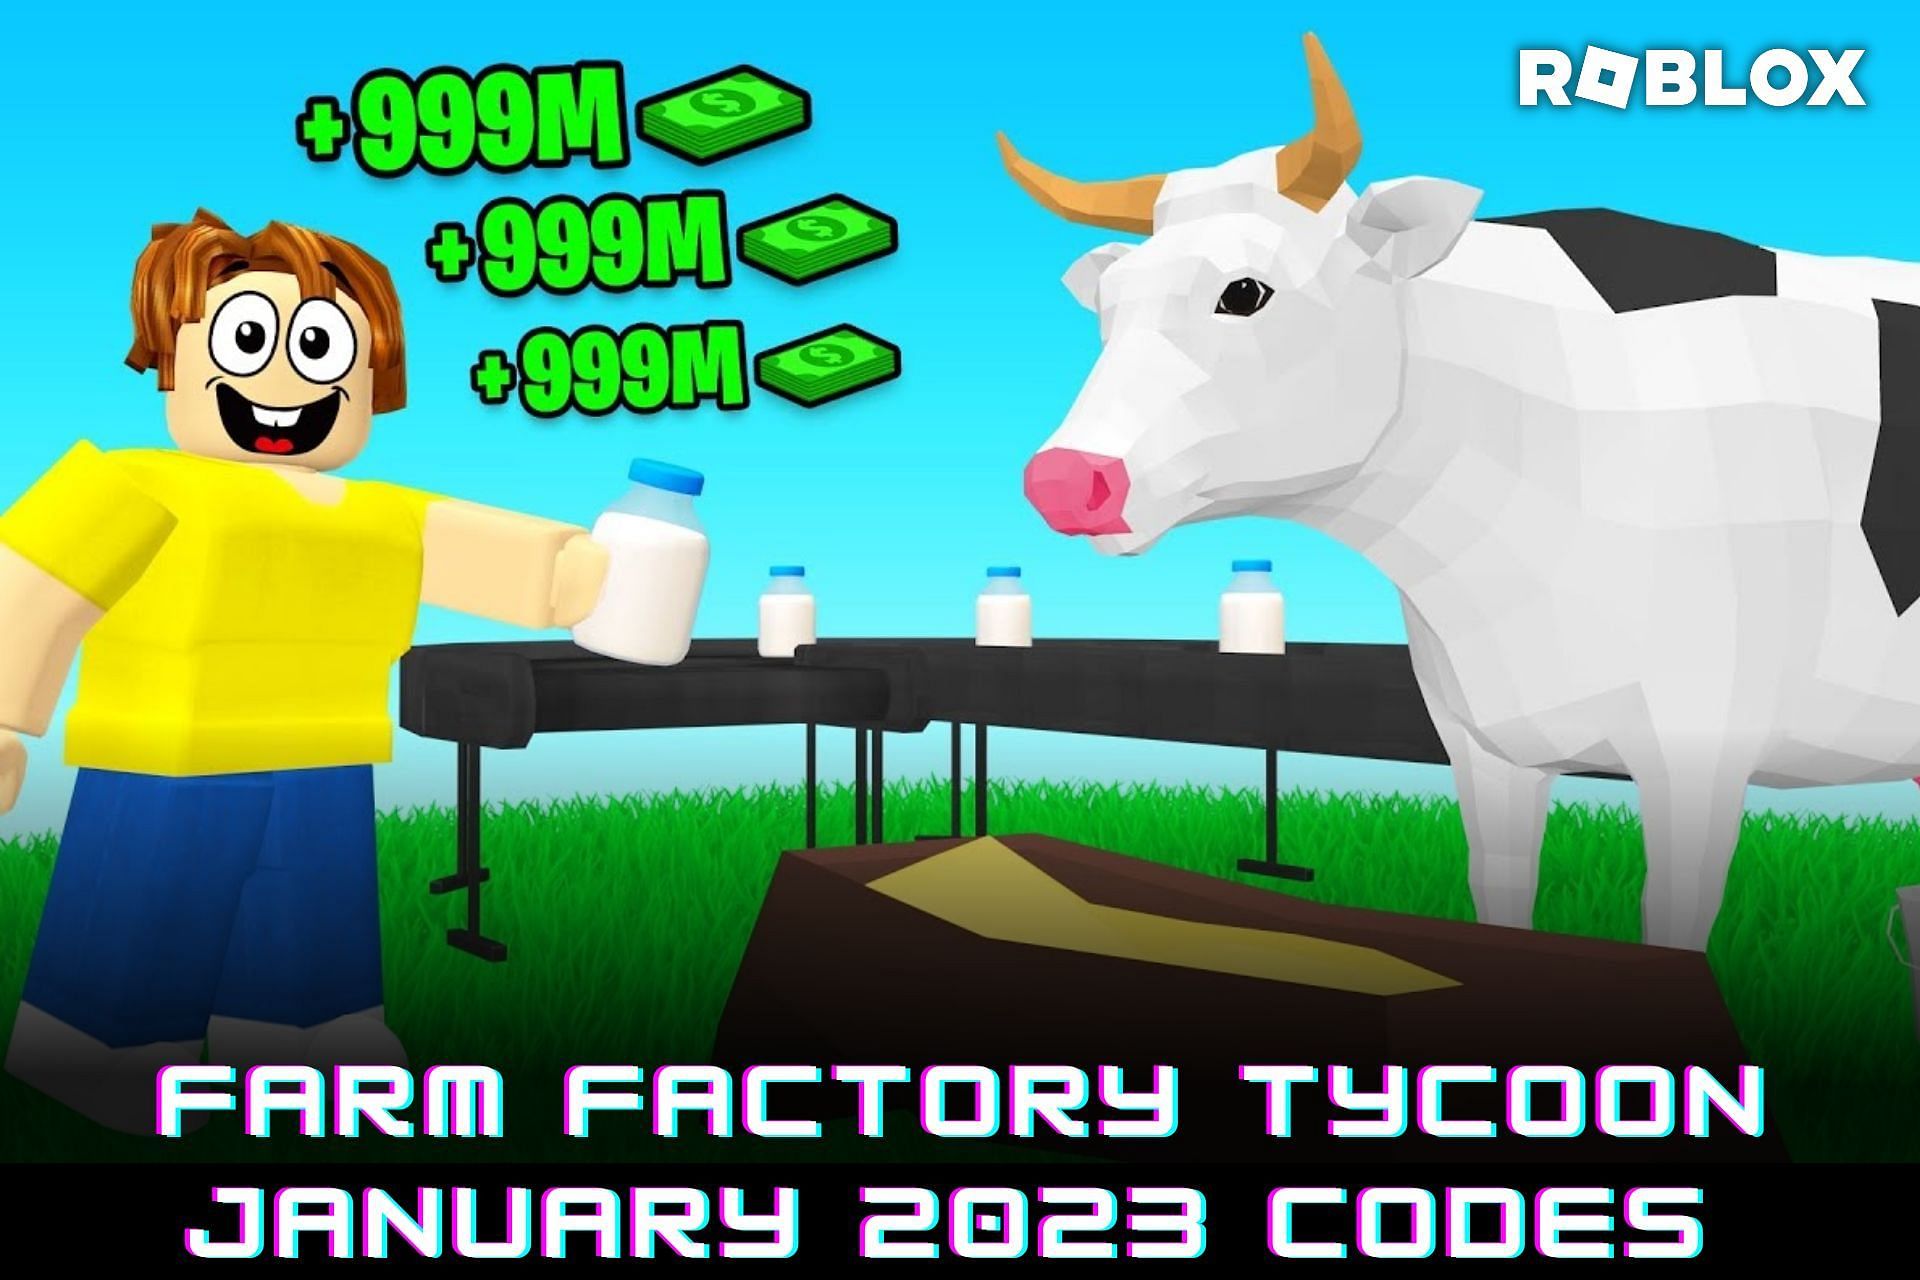 Roblox Farm Factory Tycoon Codes for January 2023 Free gems, cash, and